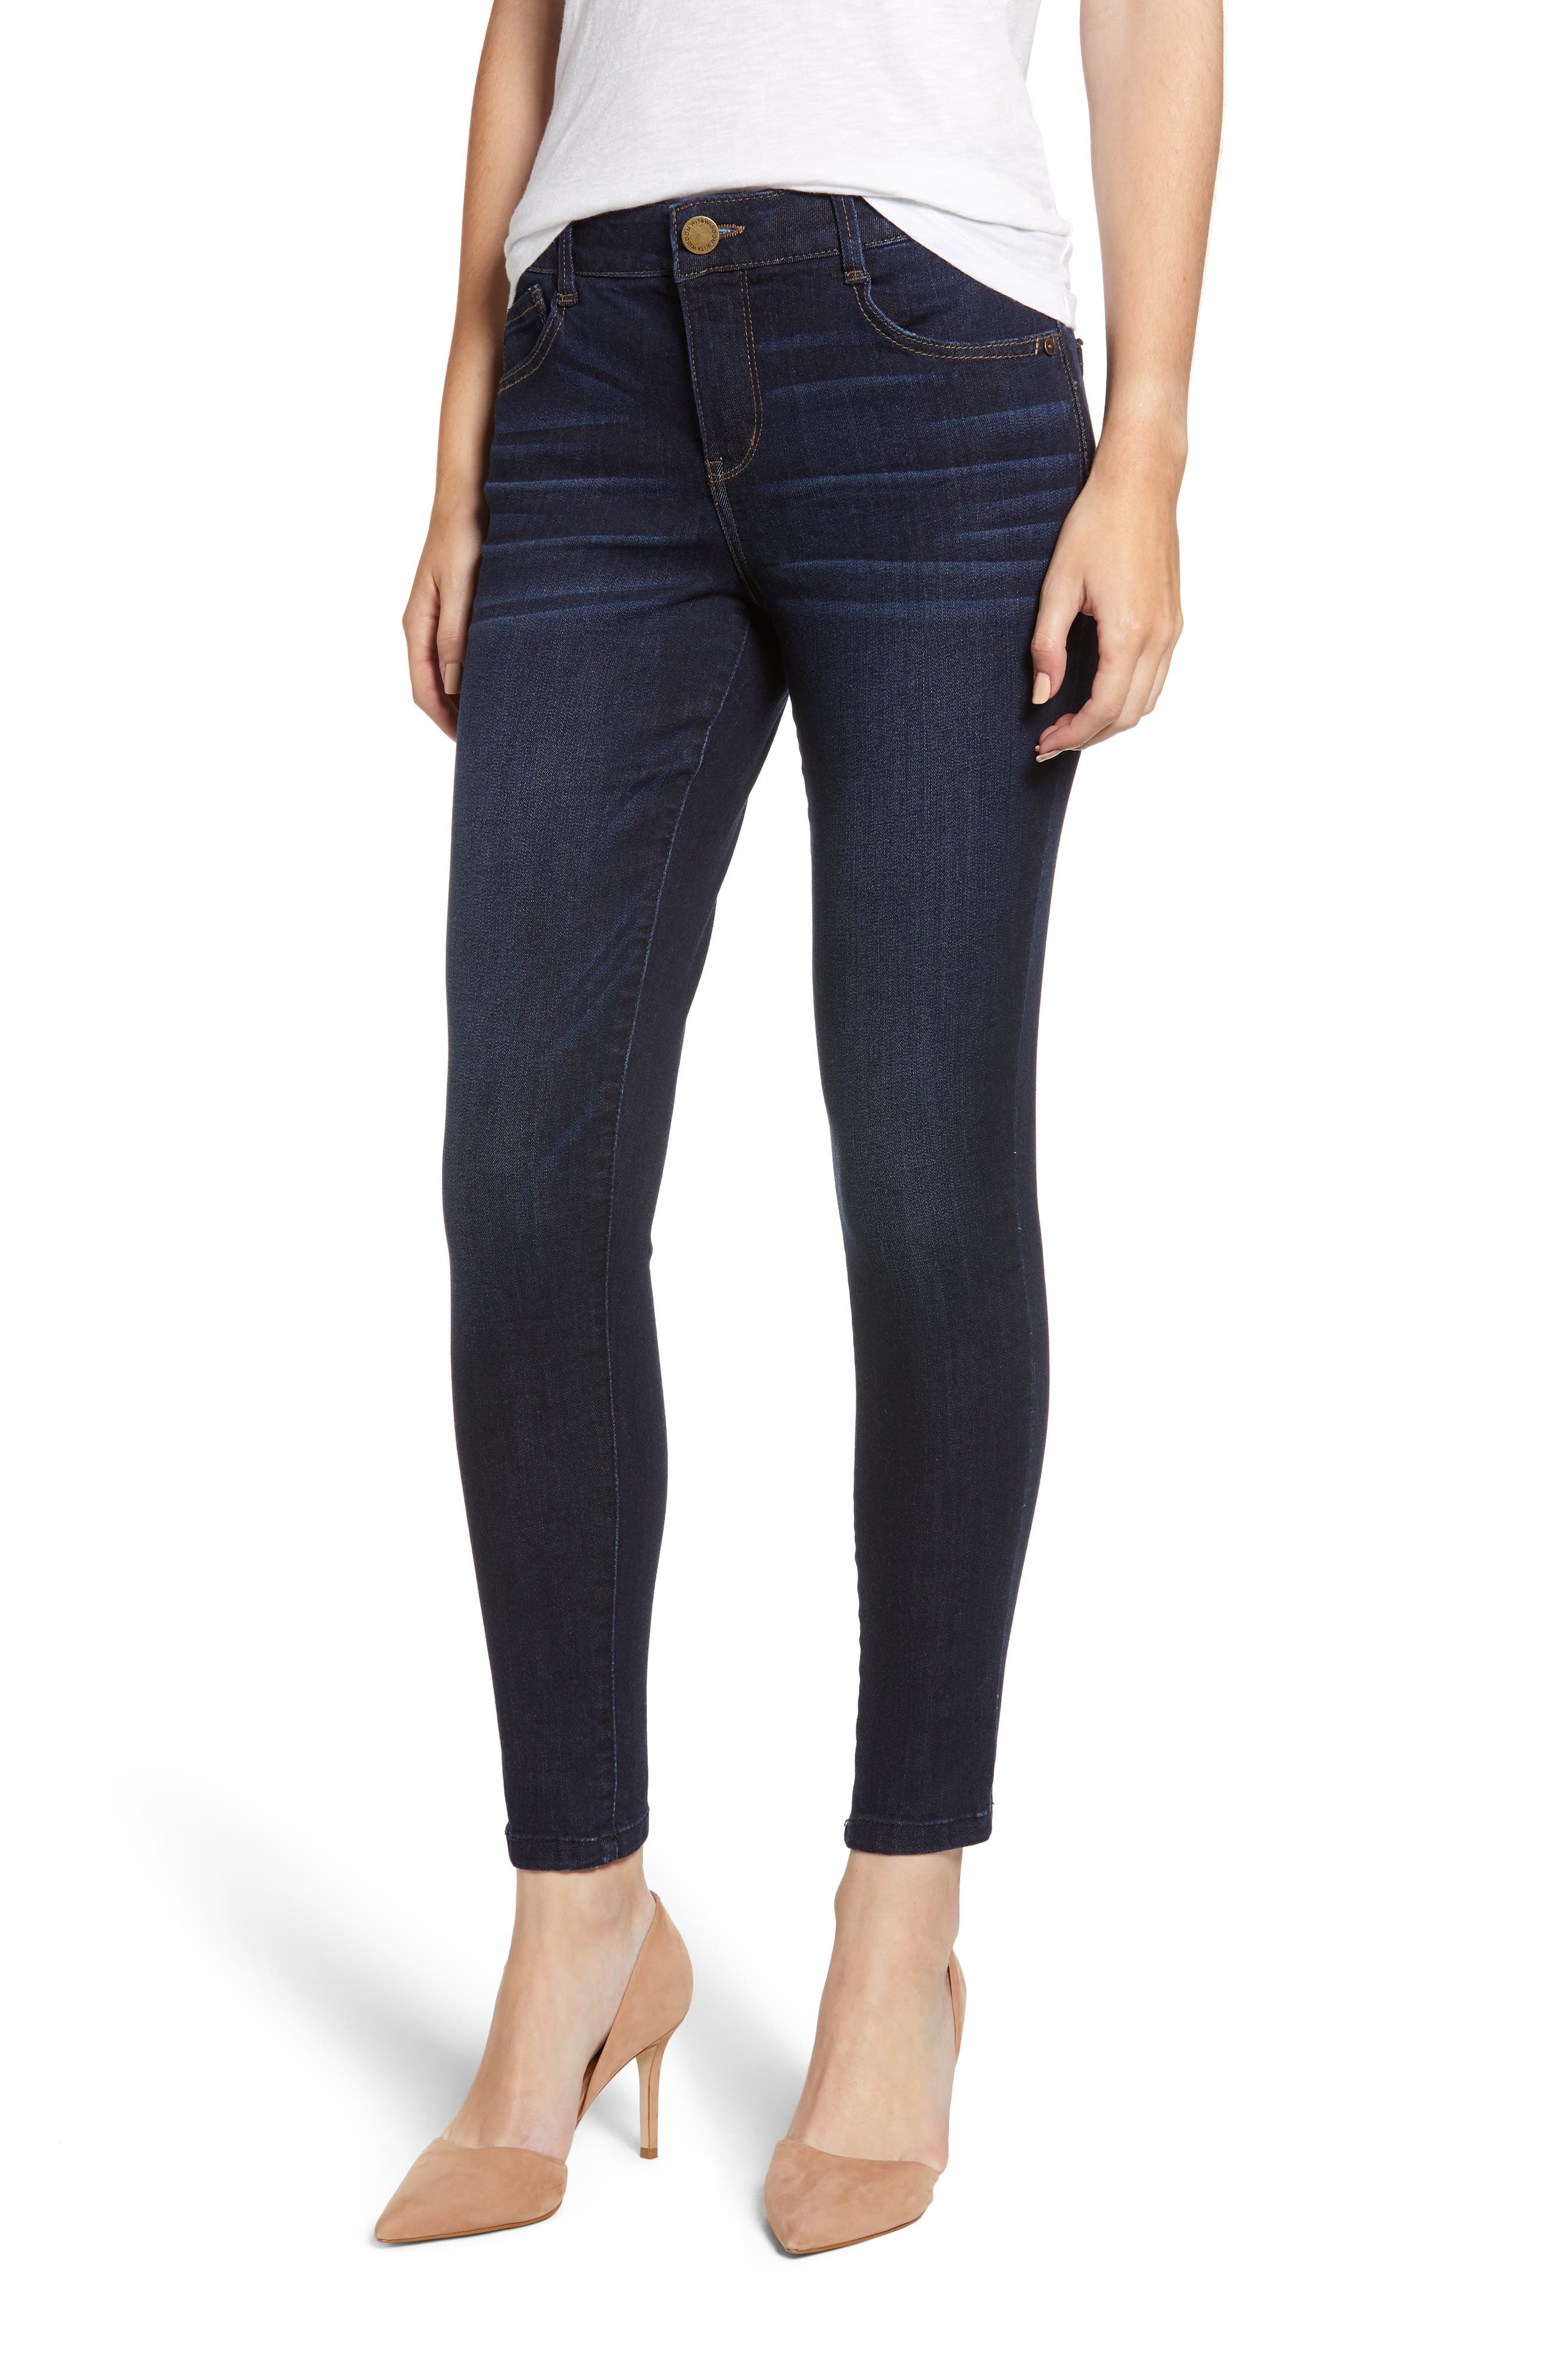 next petite jeans and jeggings